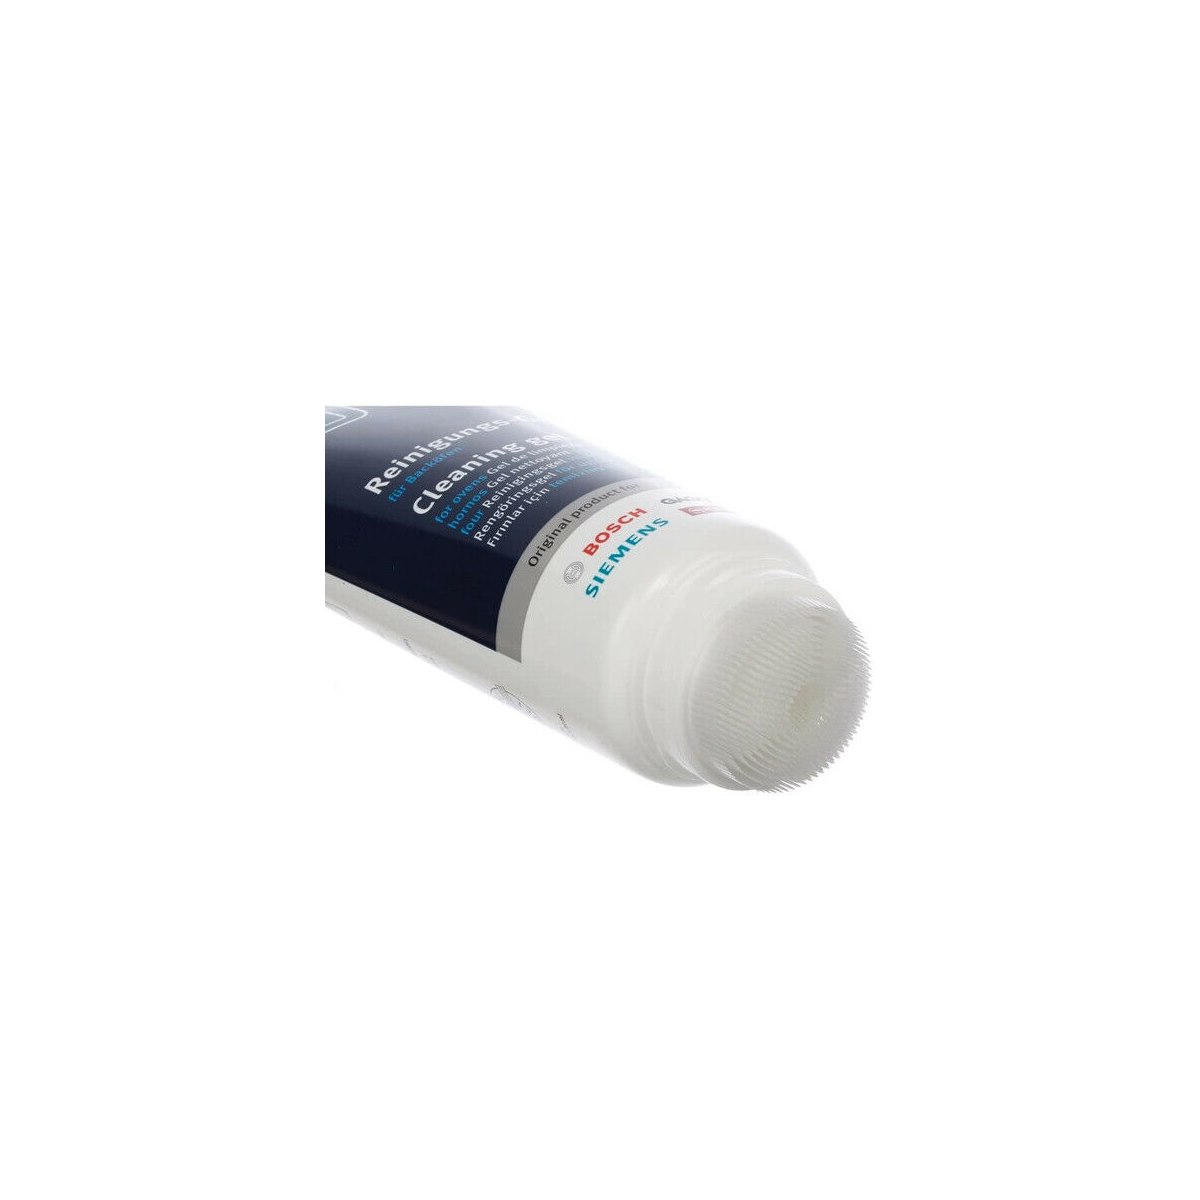 Bosch Oven Cleaning Gel 200ml